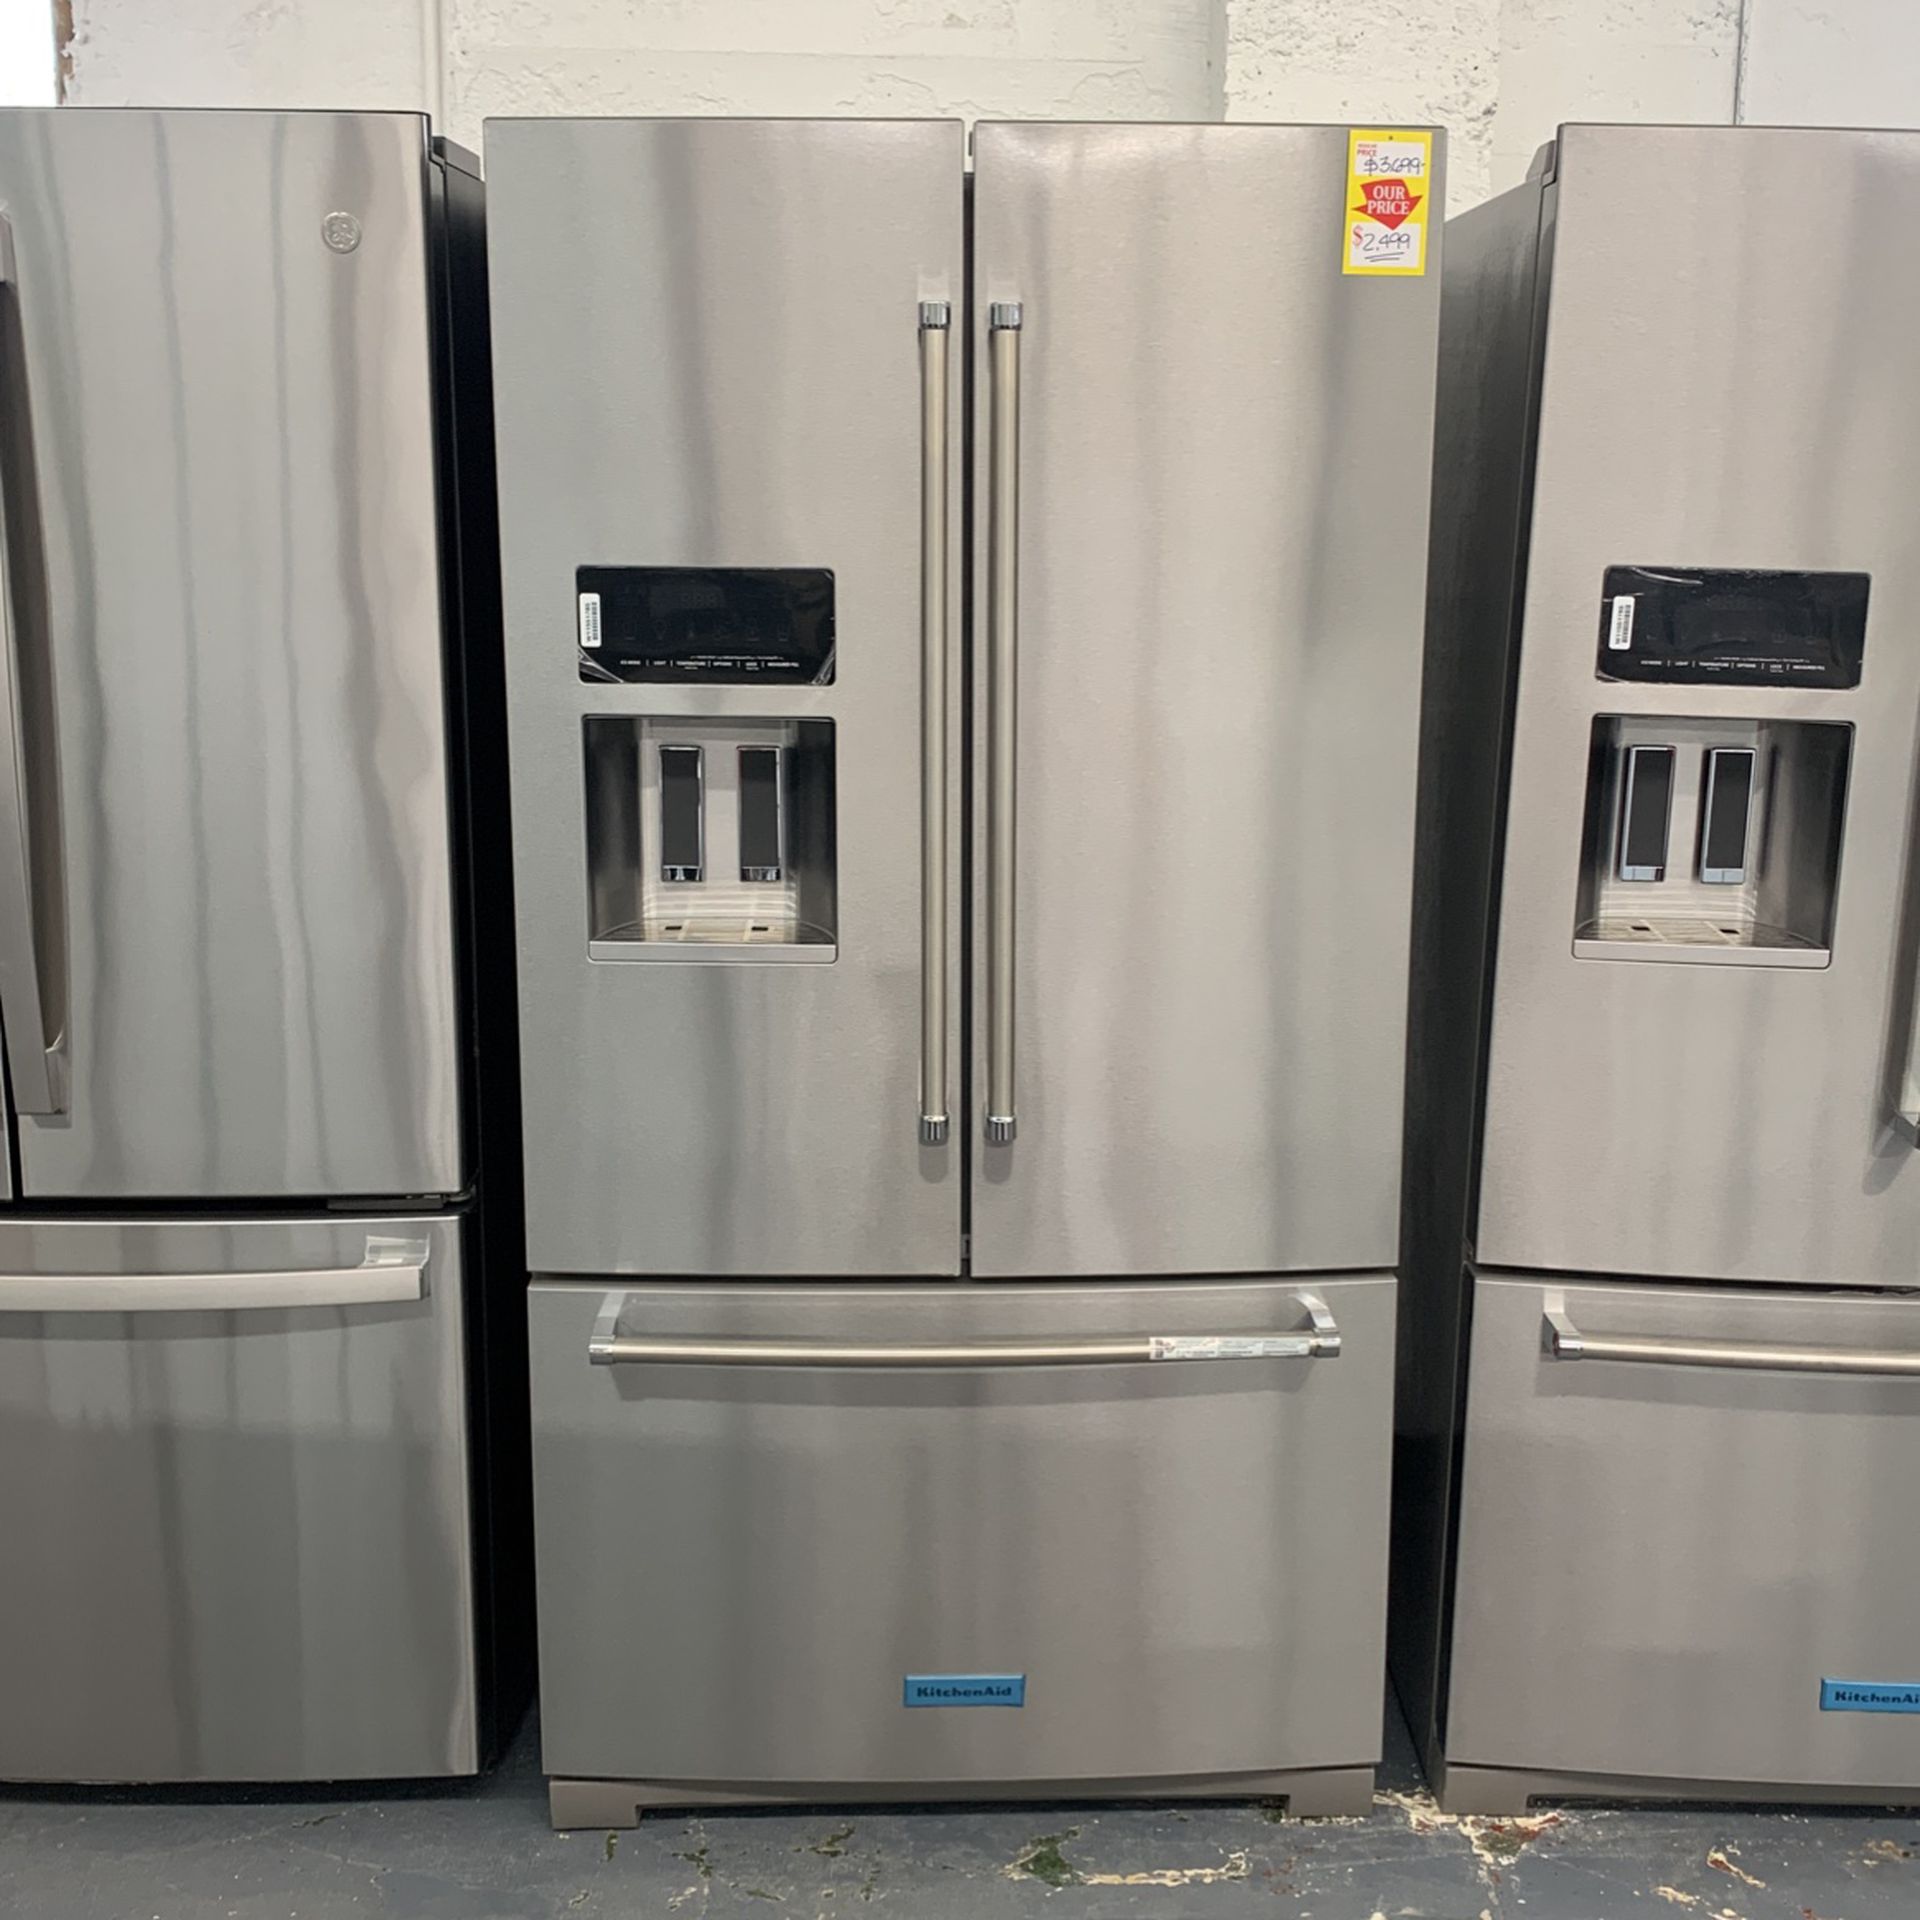 26.8 Cu. Ft. Standard-Depth French Door Refrigerator With Exterior Ice And Water Dispenser $2,499